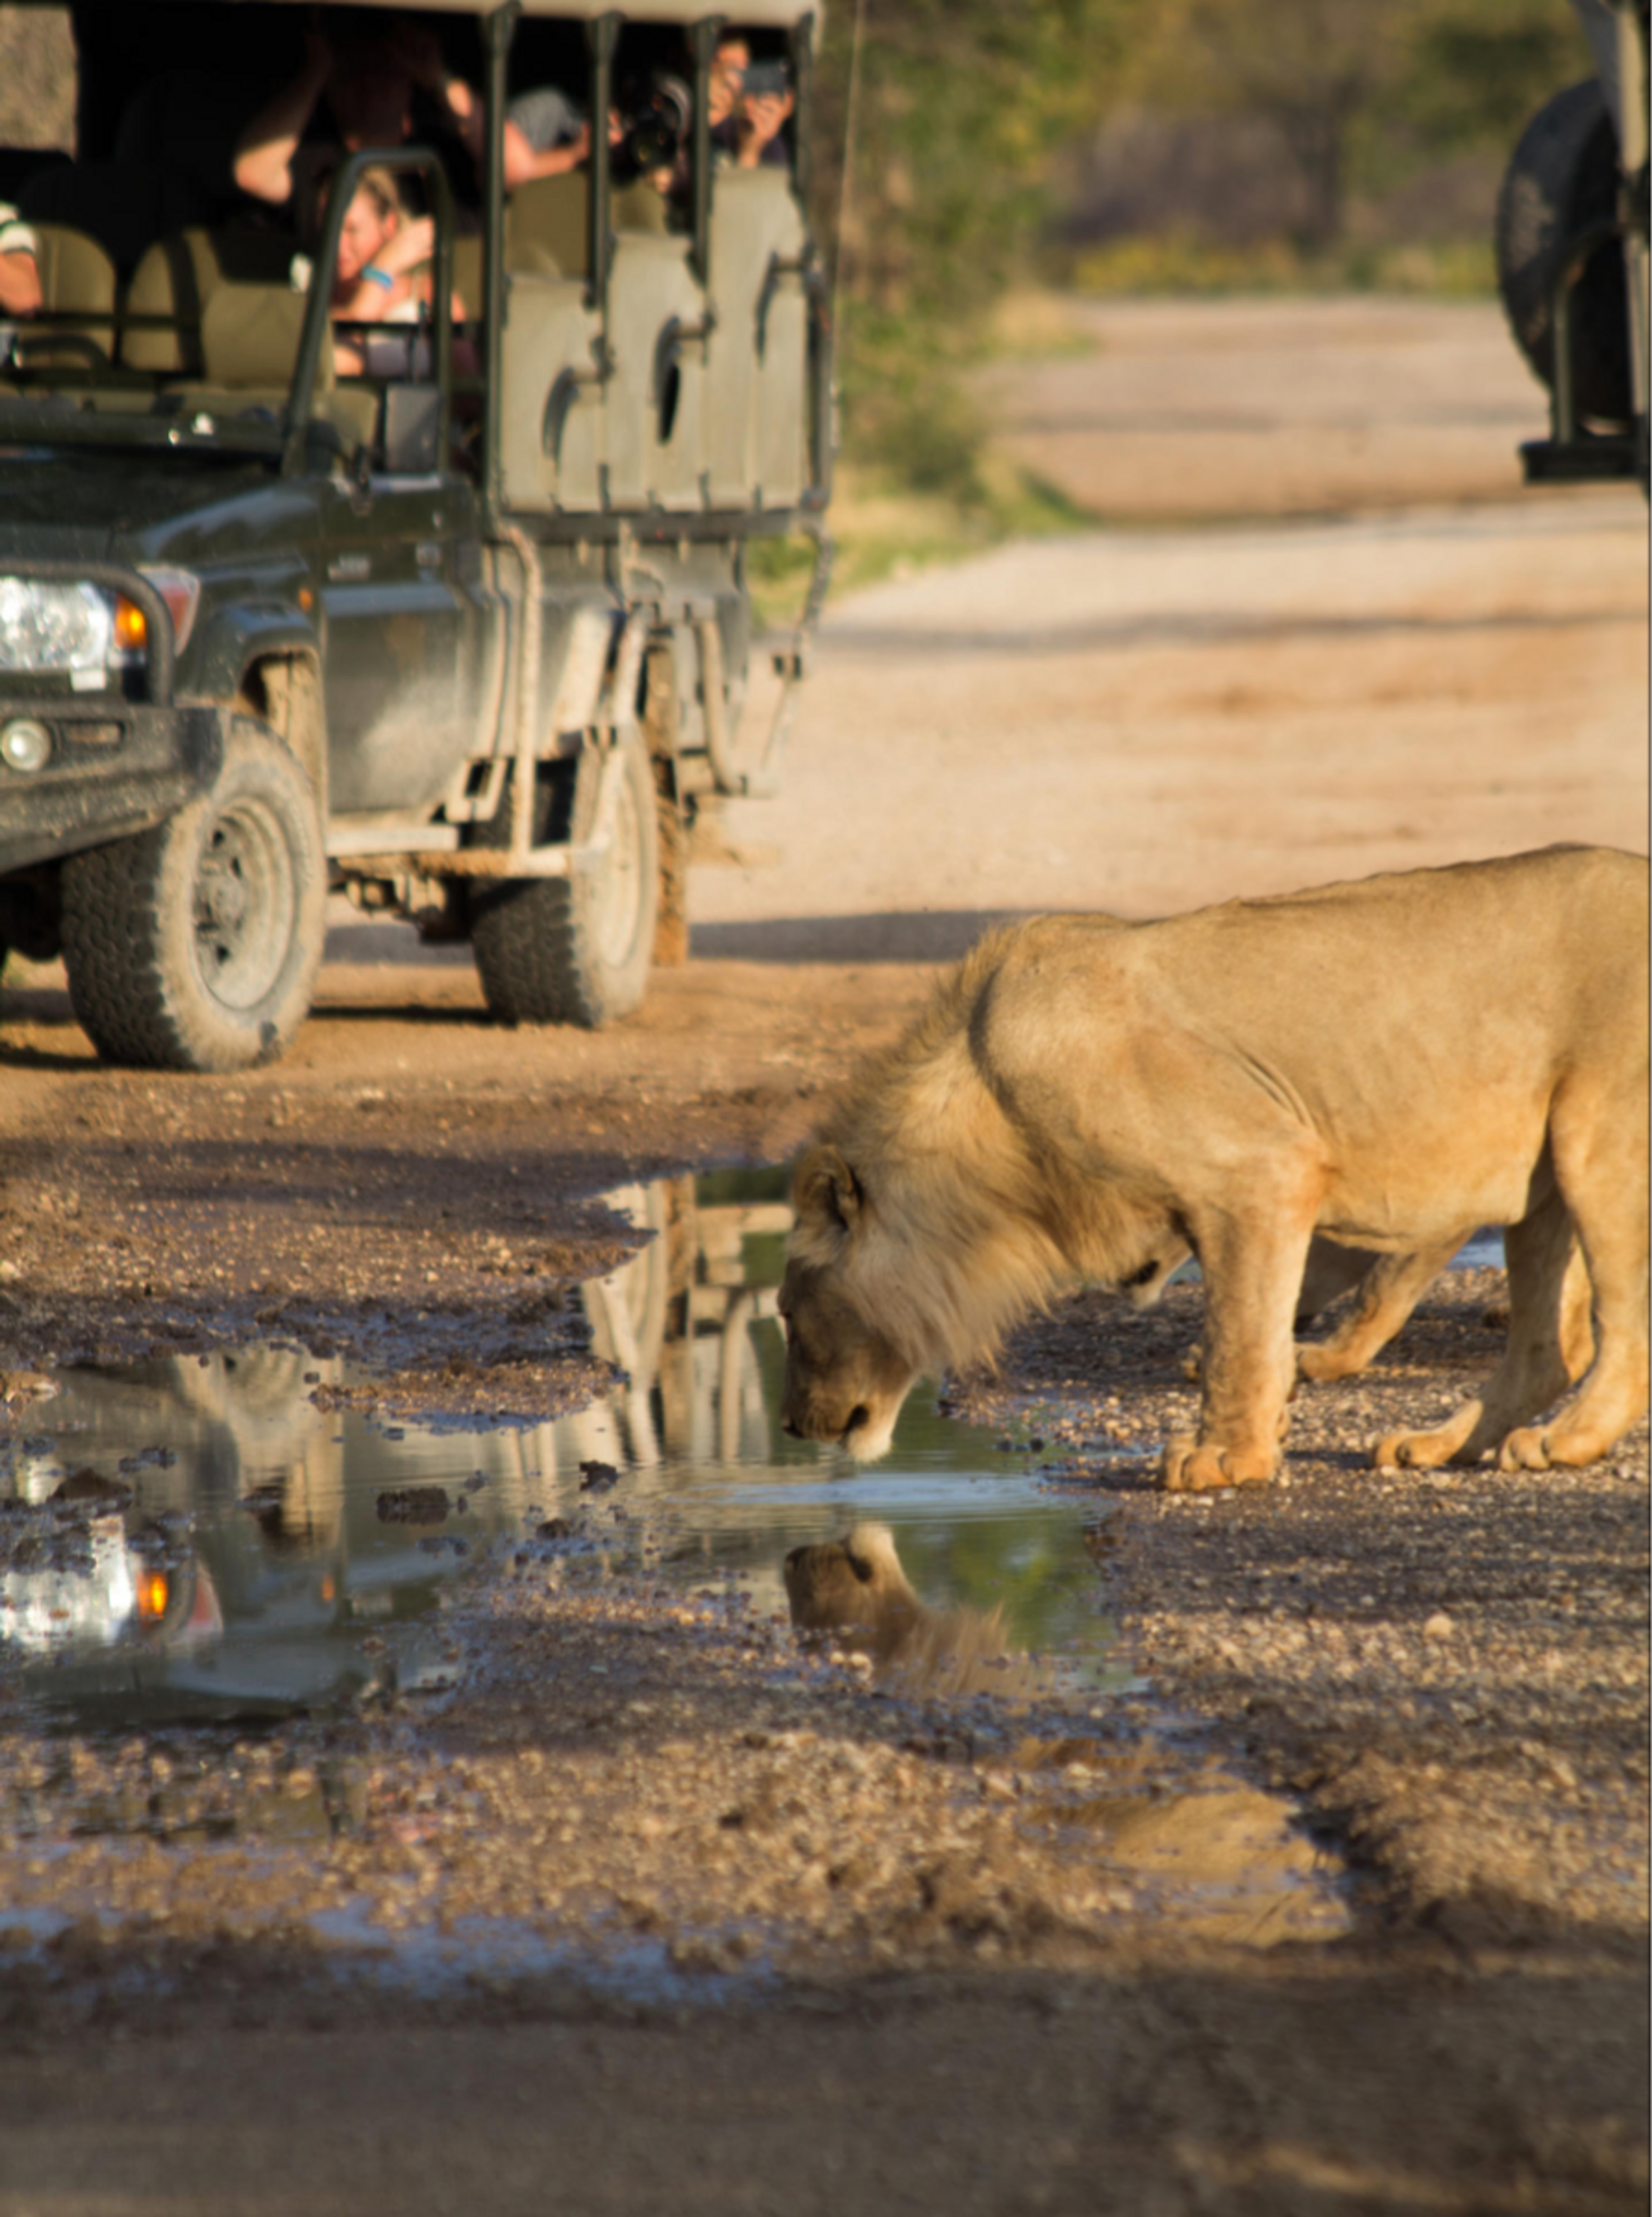 Every game drive at Ongava is an opportunity to reflect on the wonders of the wild.